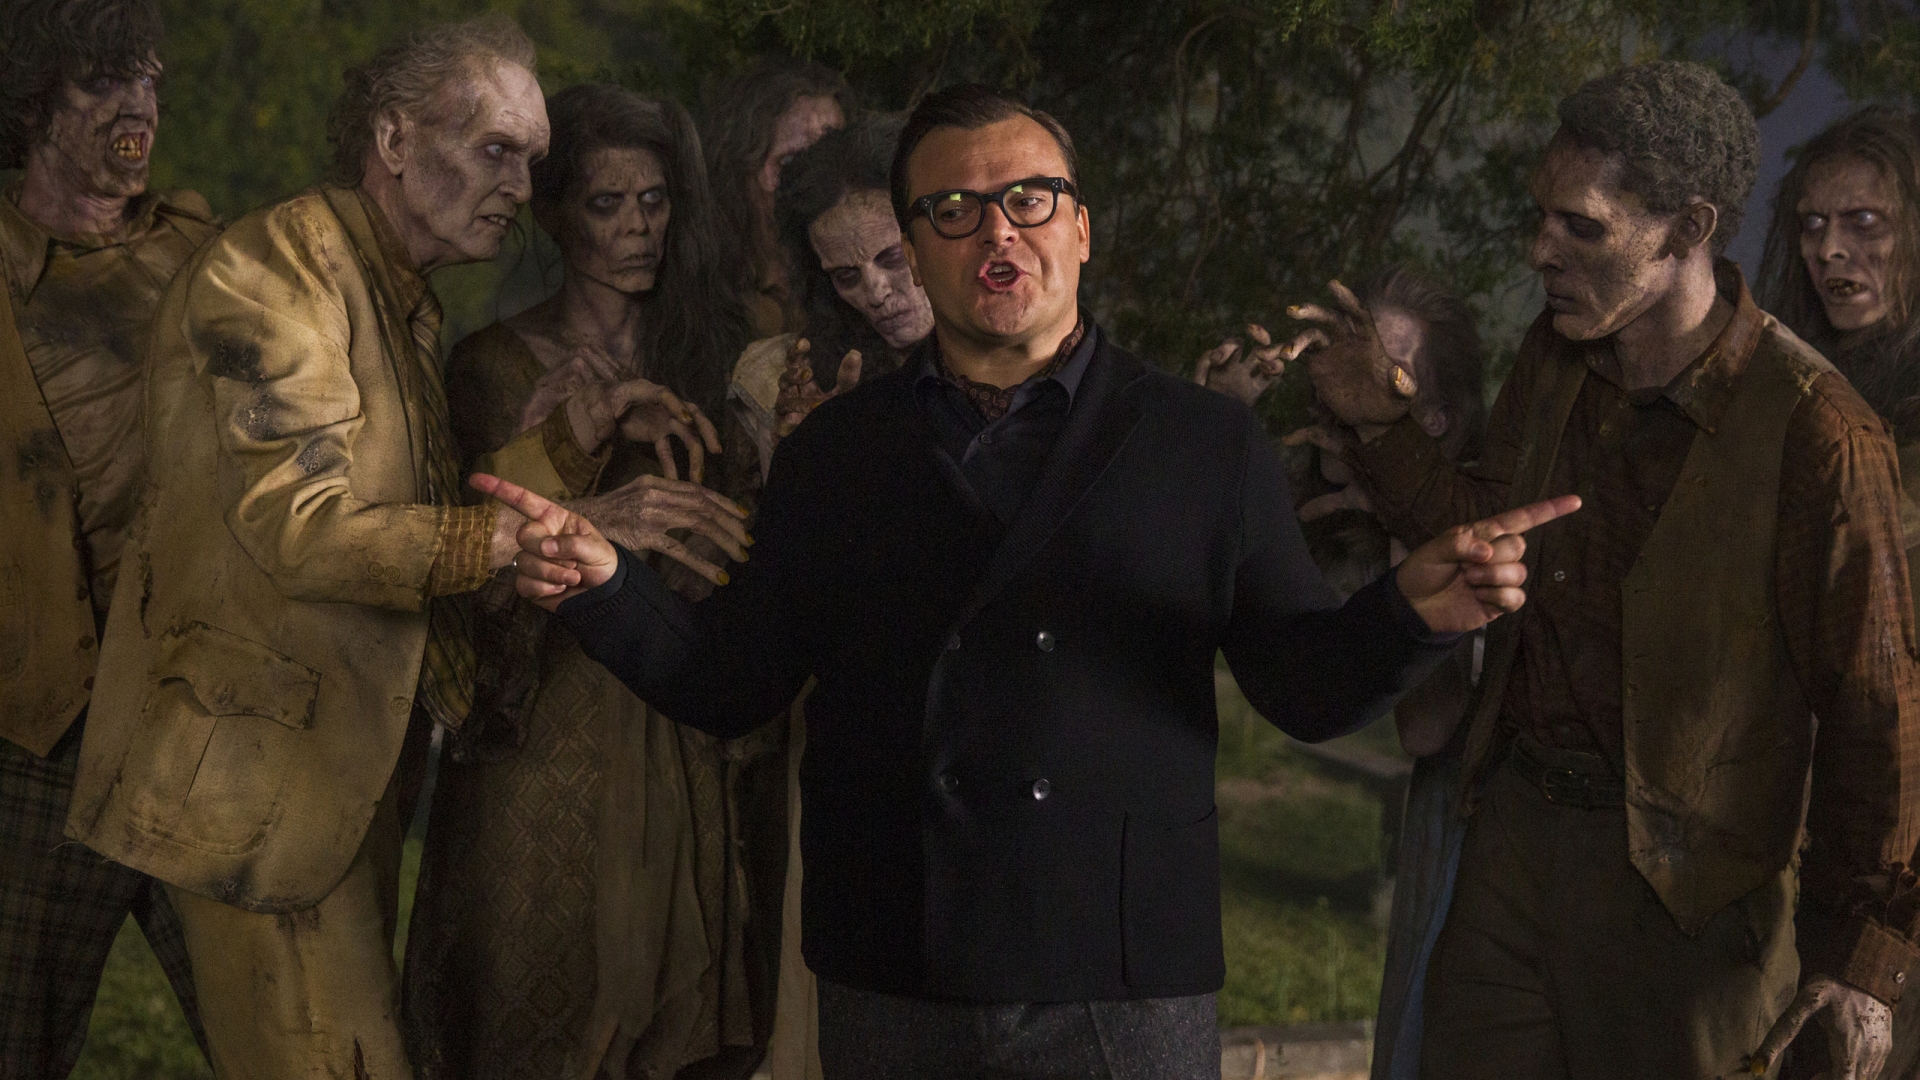 Goosebumps Movie Zombies for 1920 x 1080 HDTV 1080p resolution